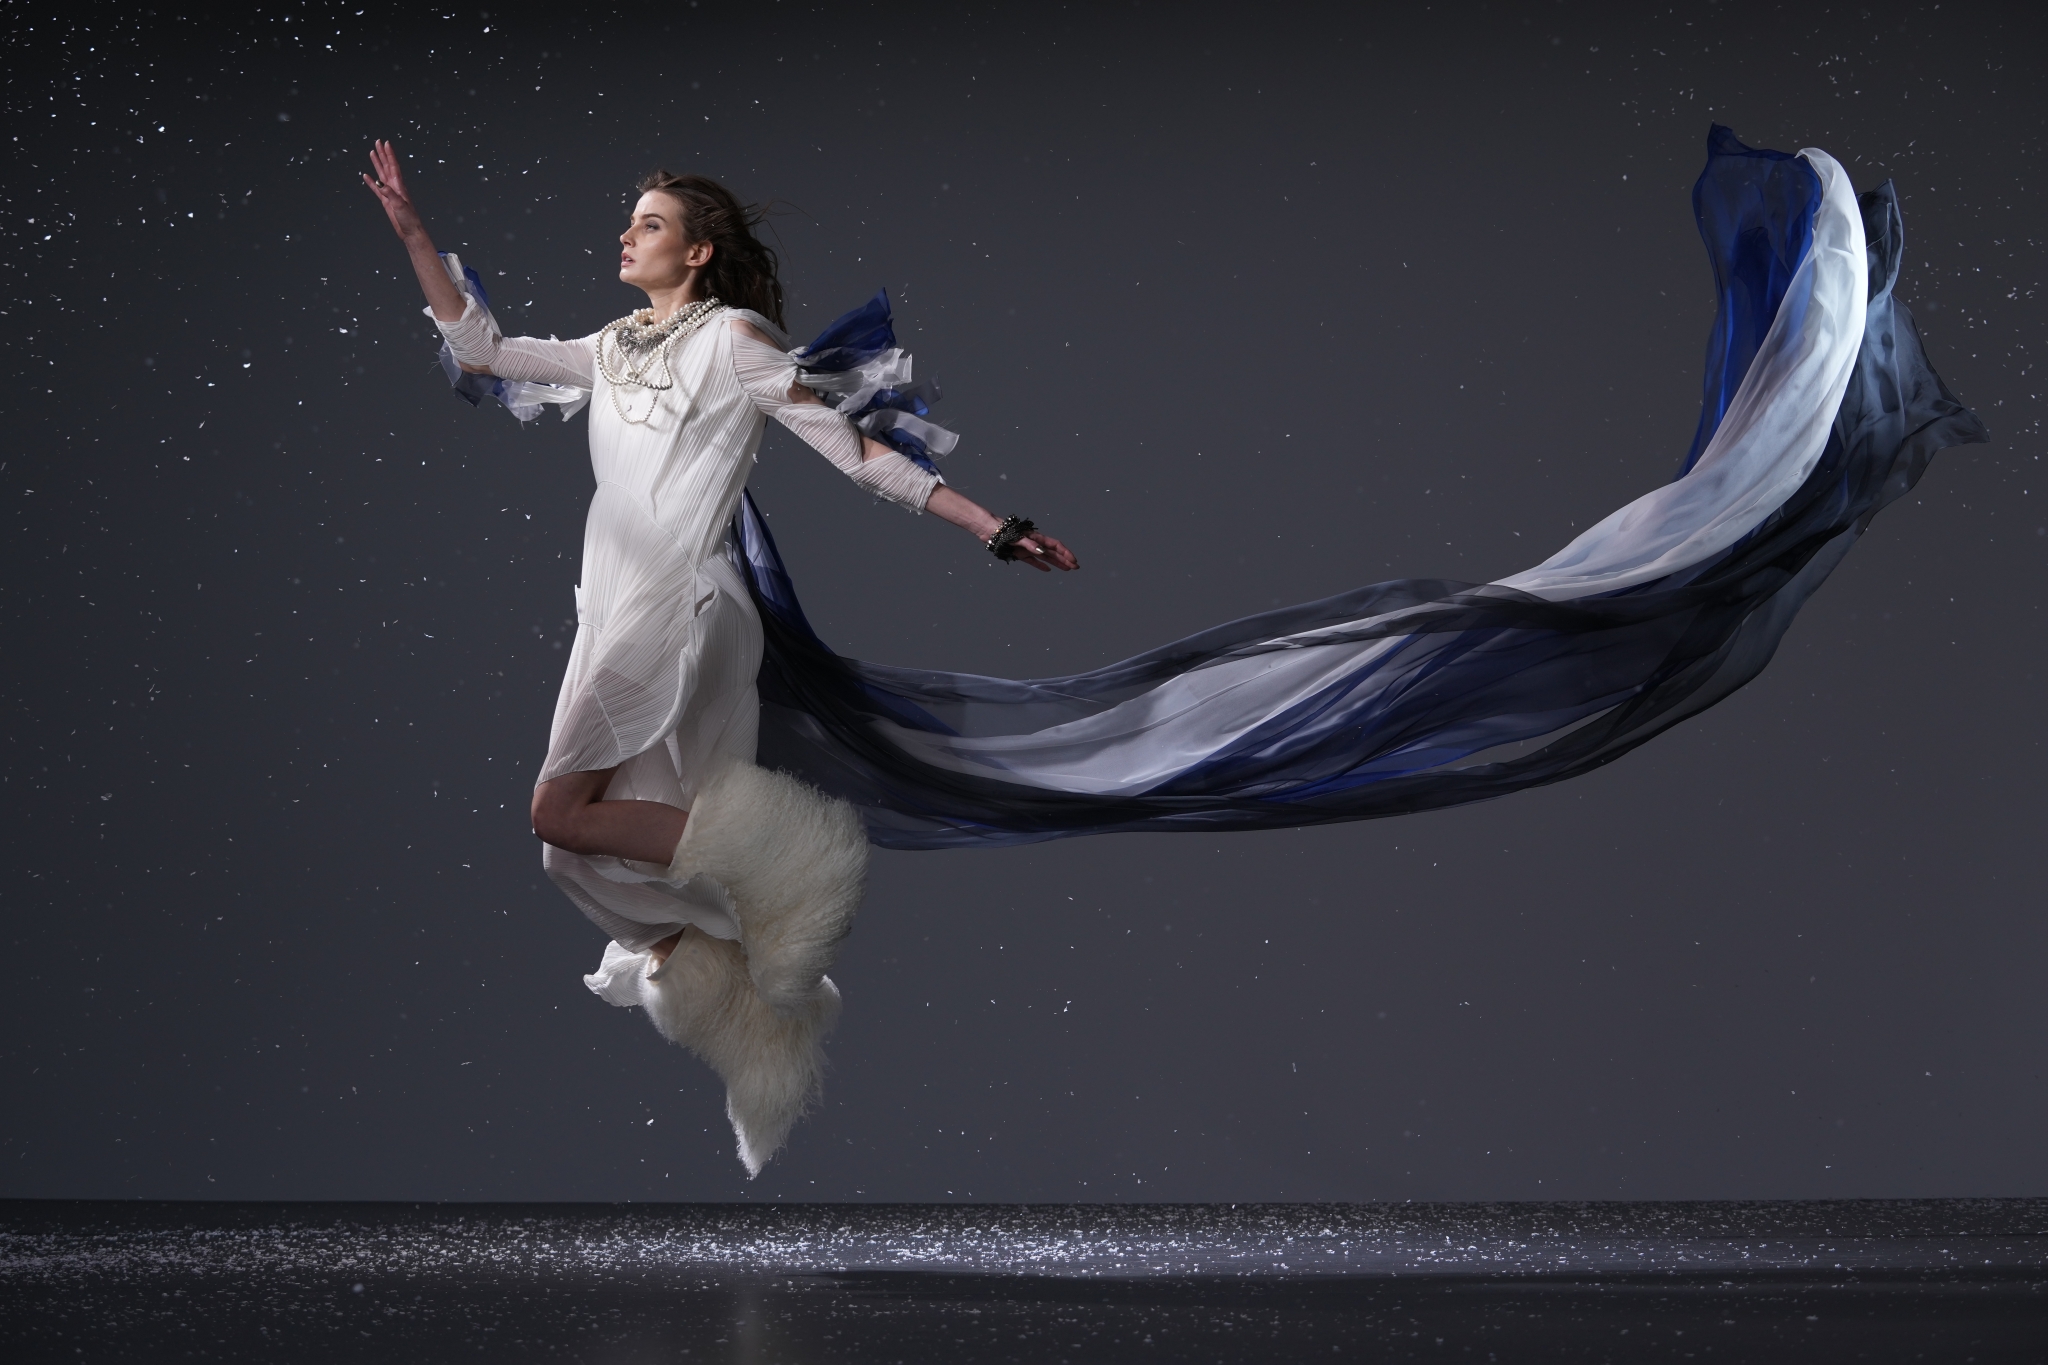 Female dancer jumping with blue cape billowing behind her